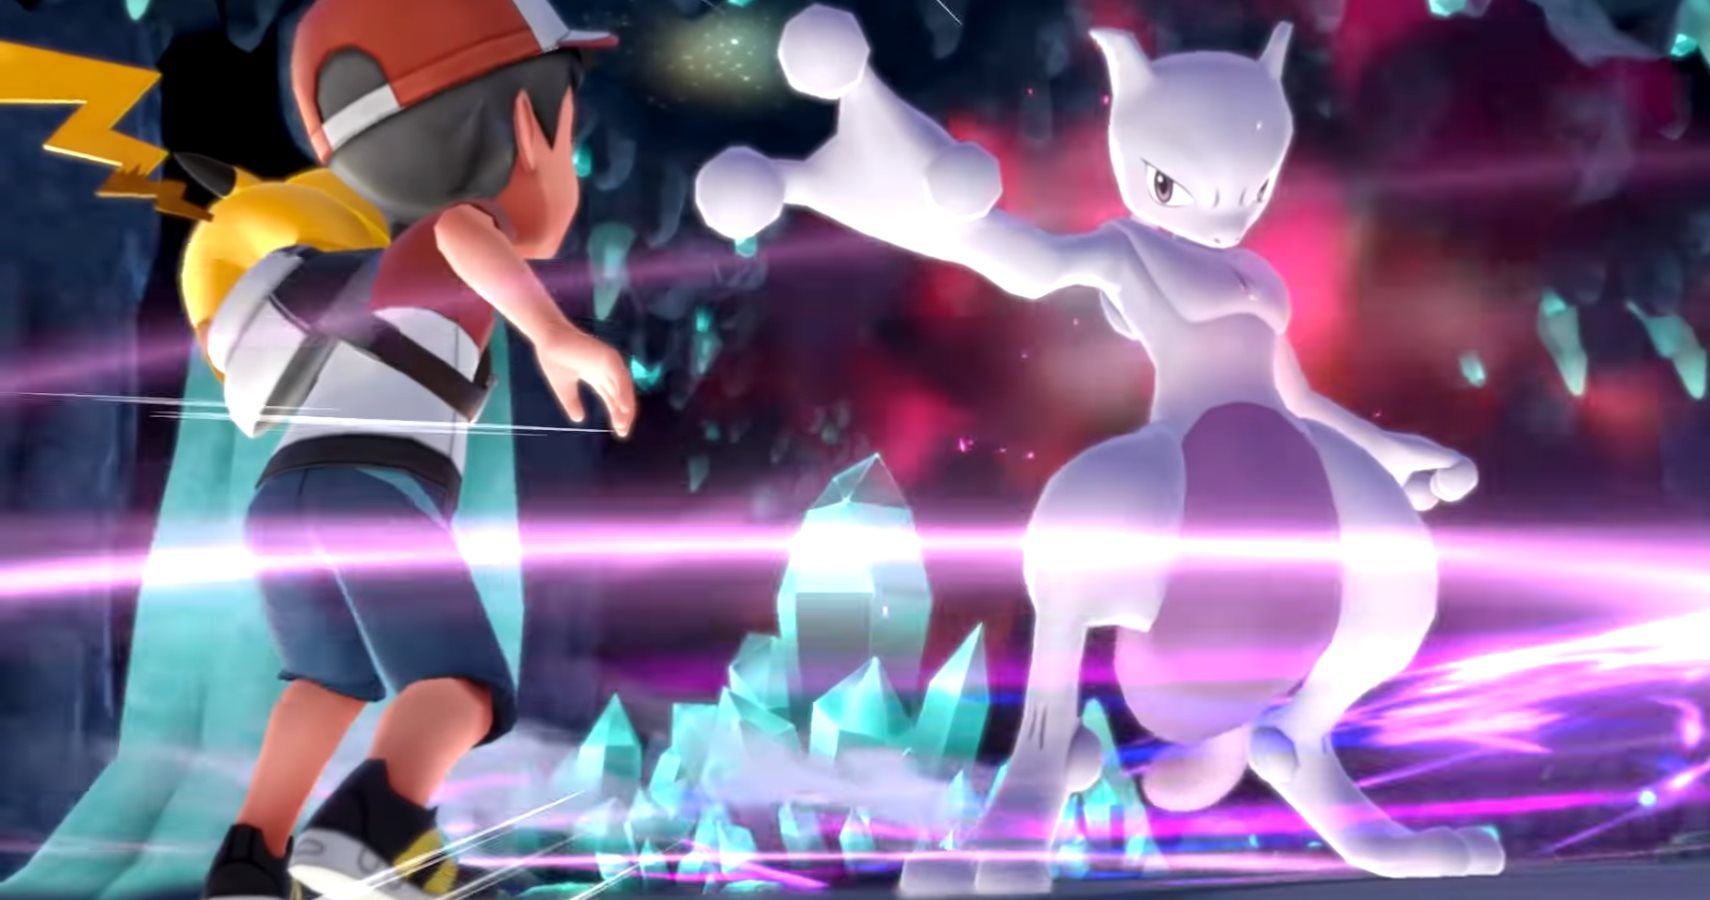 Mewtwo Makes An Appearance In New Pokémon Lets Go Trailer